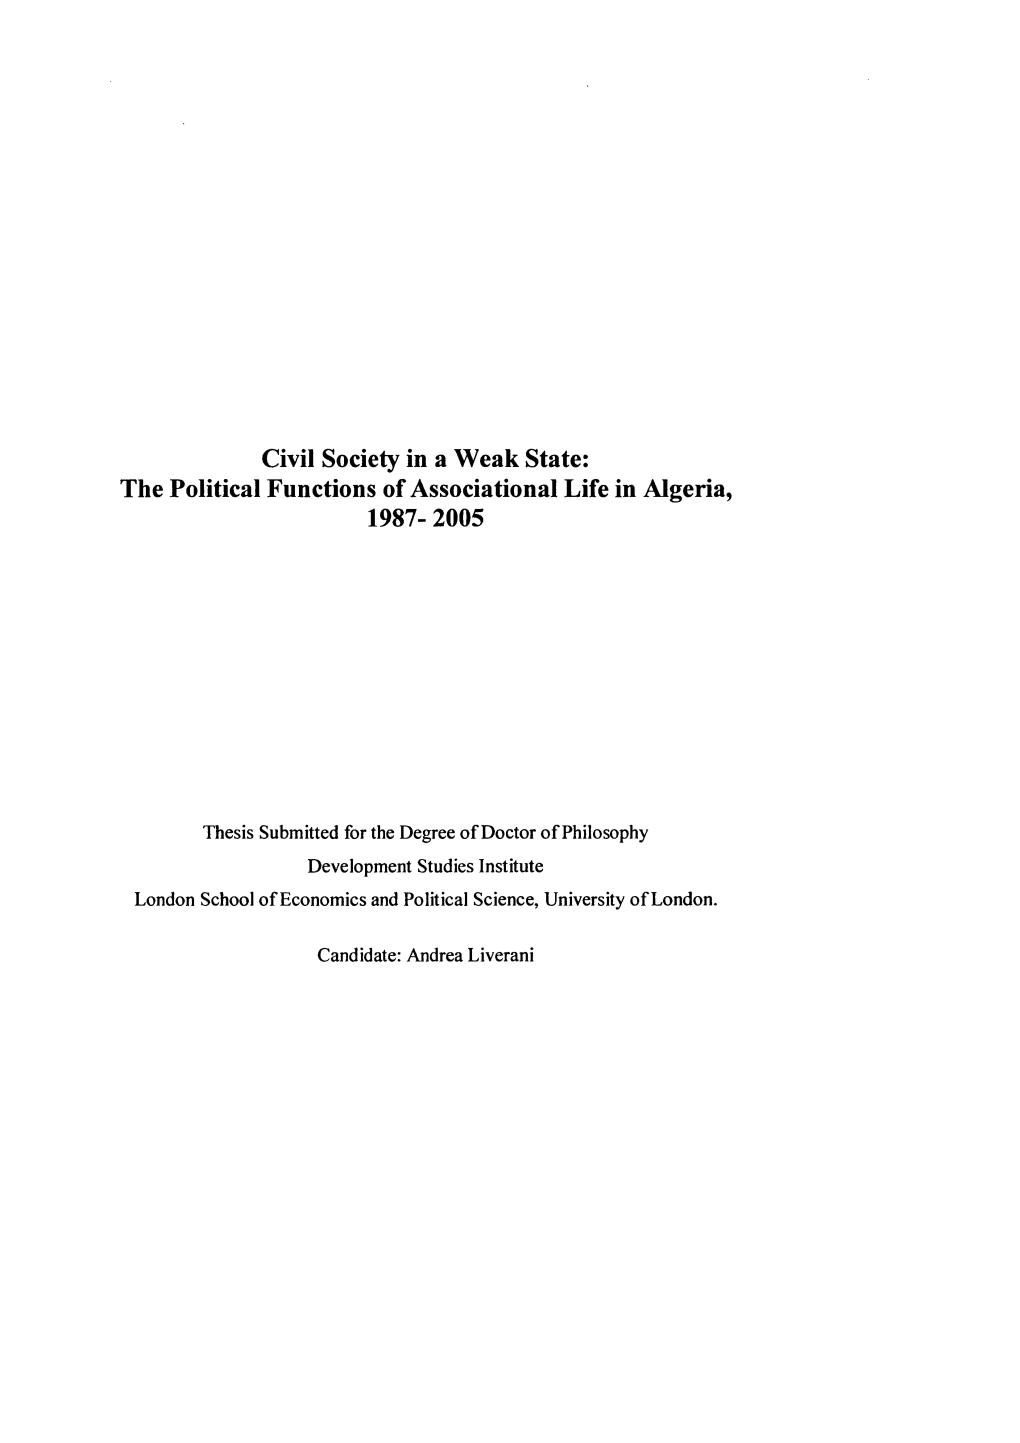 Civil Society in a Weak State: the Political Functions of Associational Life in Algeria